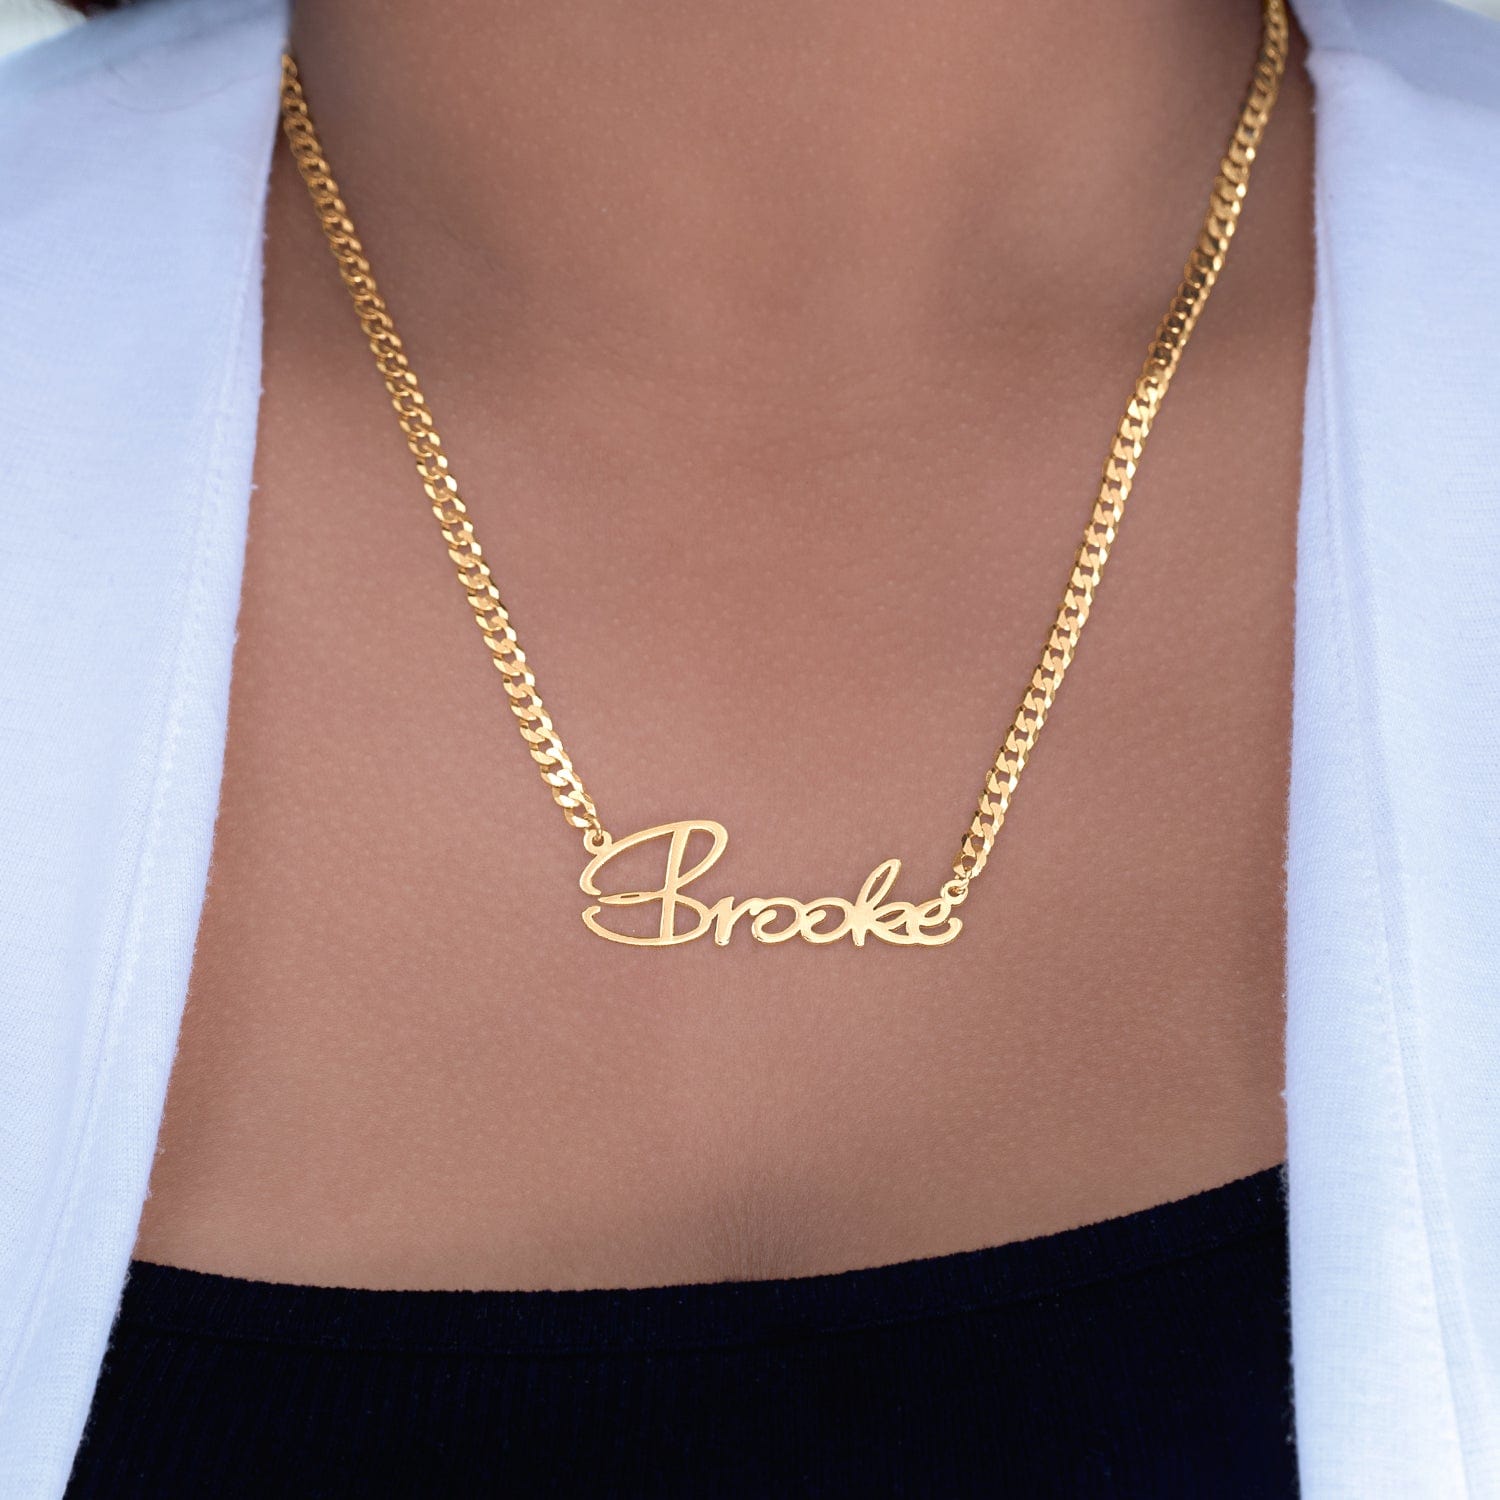 14K Gold over Sterling Silver / Cuban Chain "Brooke Style" Name Plate Necklace